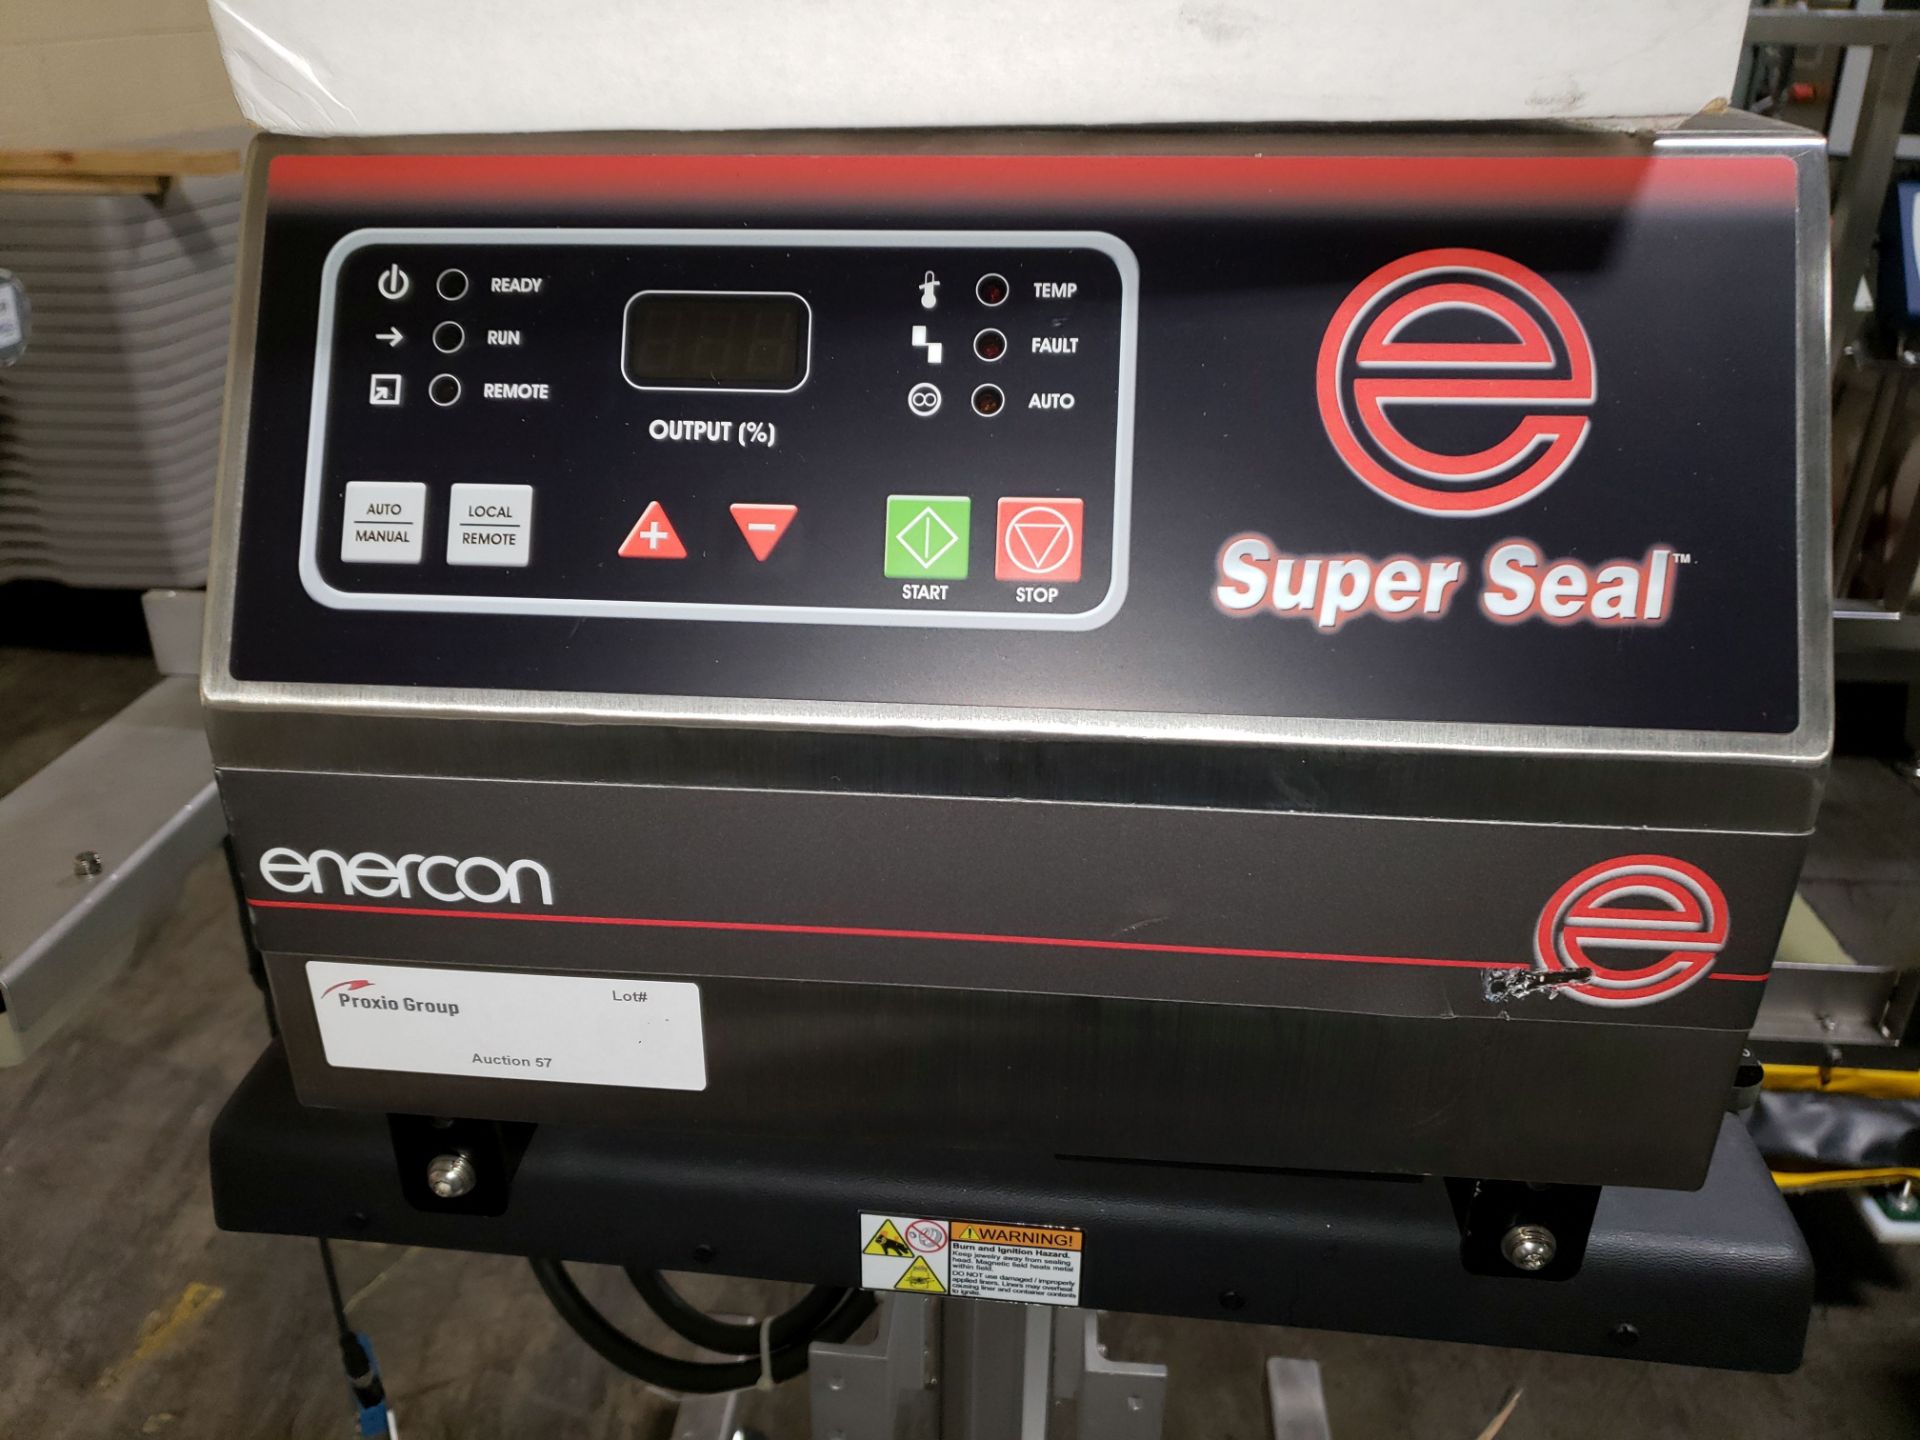 ENERCON SUPERSEAL 100 INDUCTION SEALER, MODEL LM5022-272, 208 VOLTS - Image 3 of 8